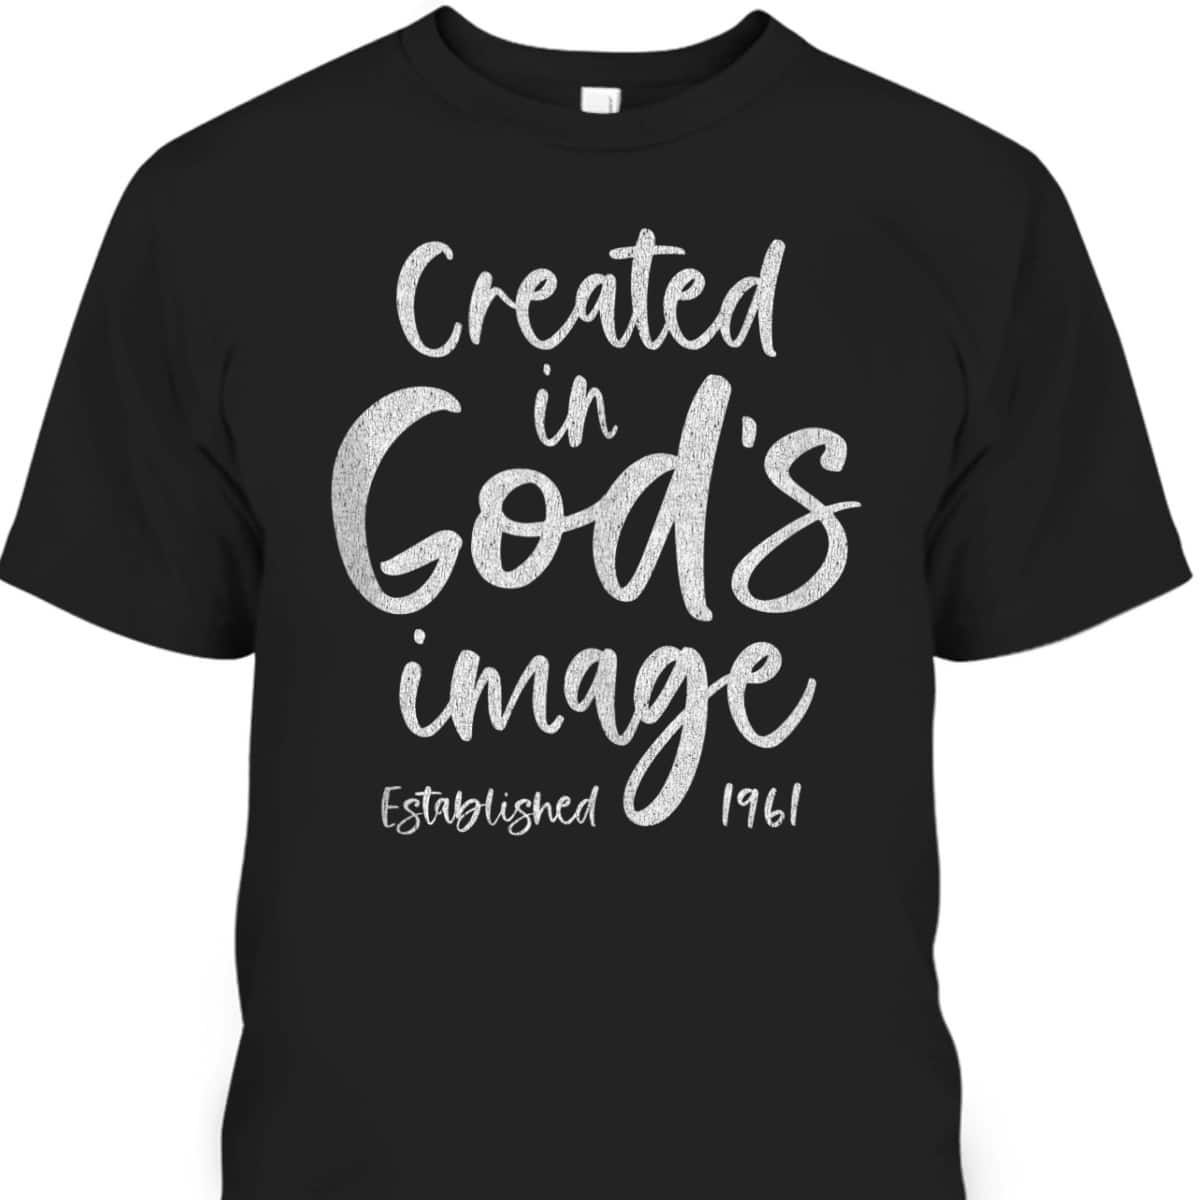 62 Year Old Christian Jesus 1961 62nd Birthday Created In God's Image T-Shirt